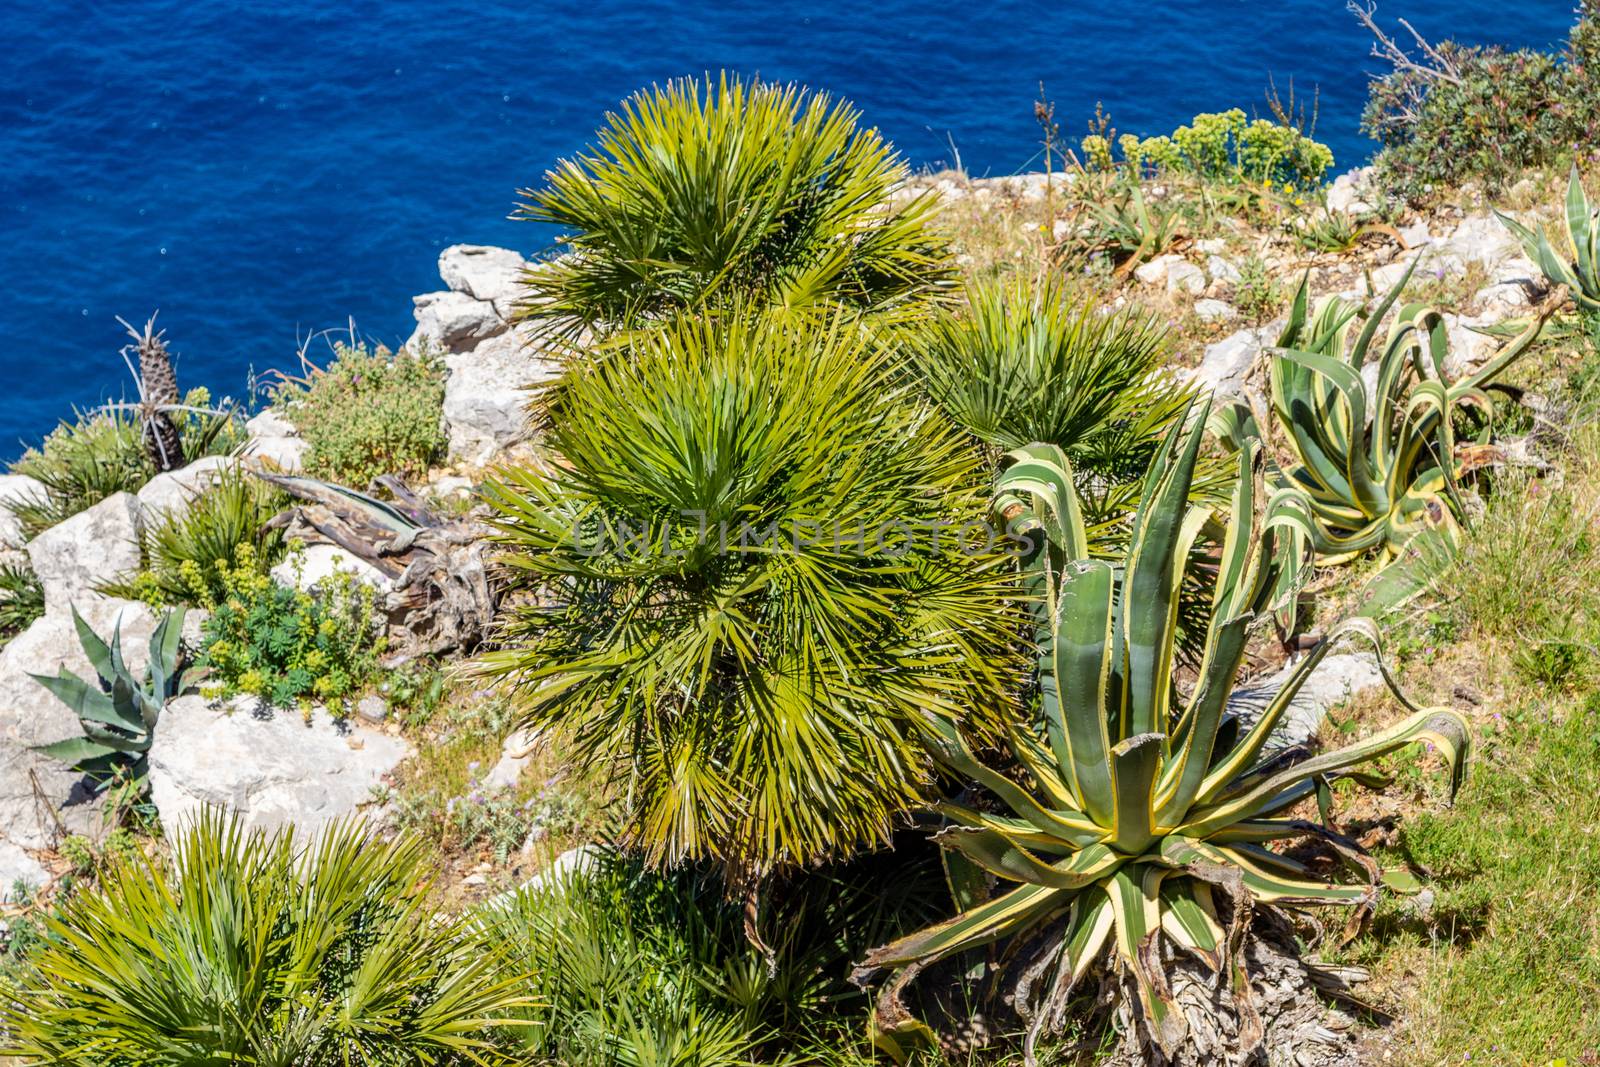 Scenic view from viewpoint Mirador Ricardo Roco on  the north coast of Mallorca with vegetation in foreground
 